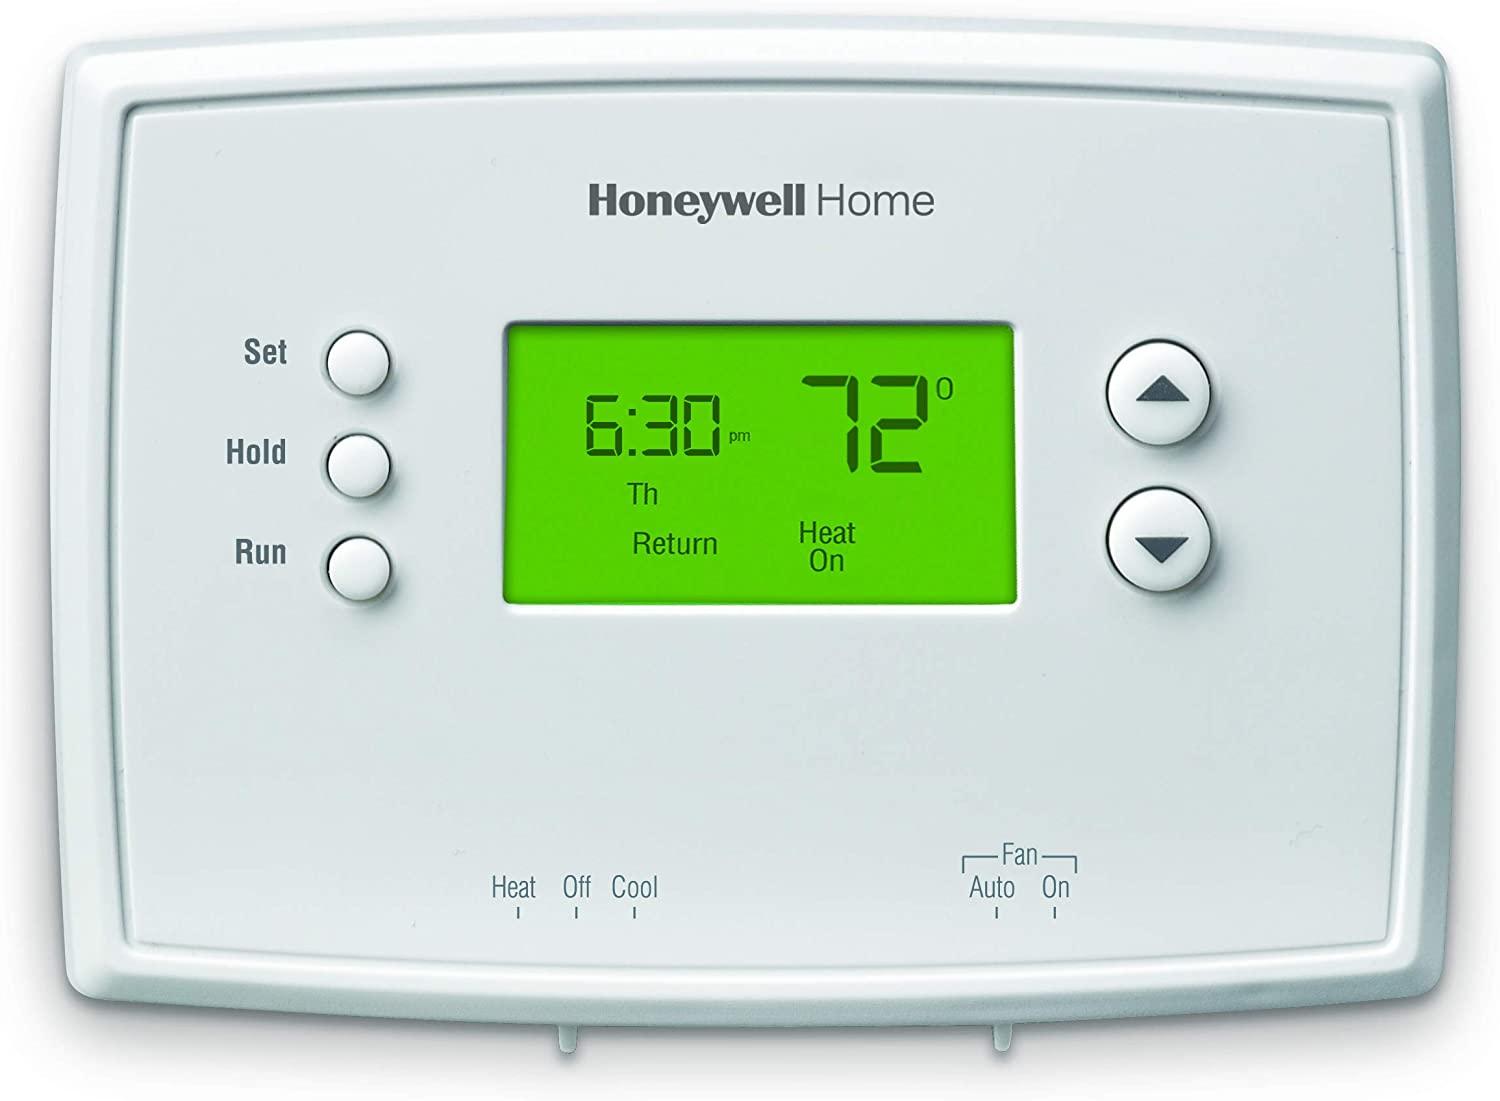 Honeywell Home Programmable Thermostat for $12.99